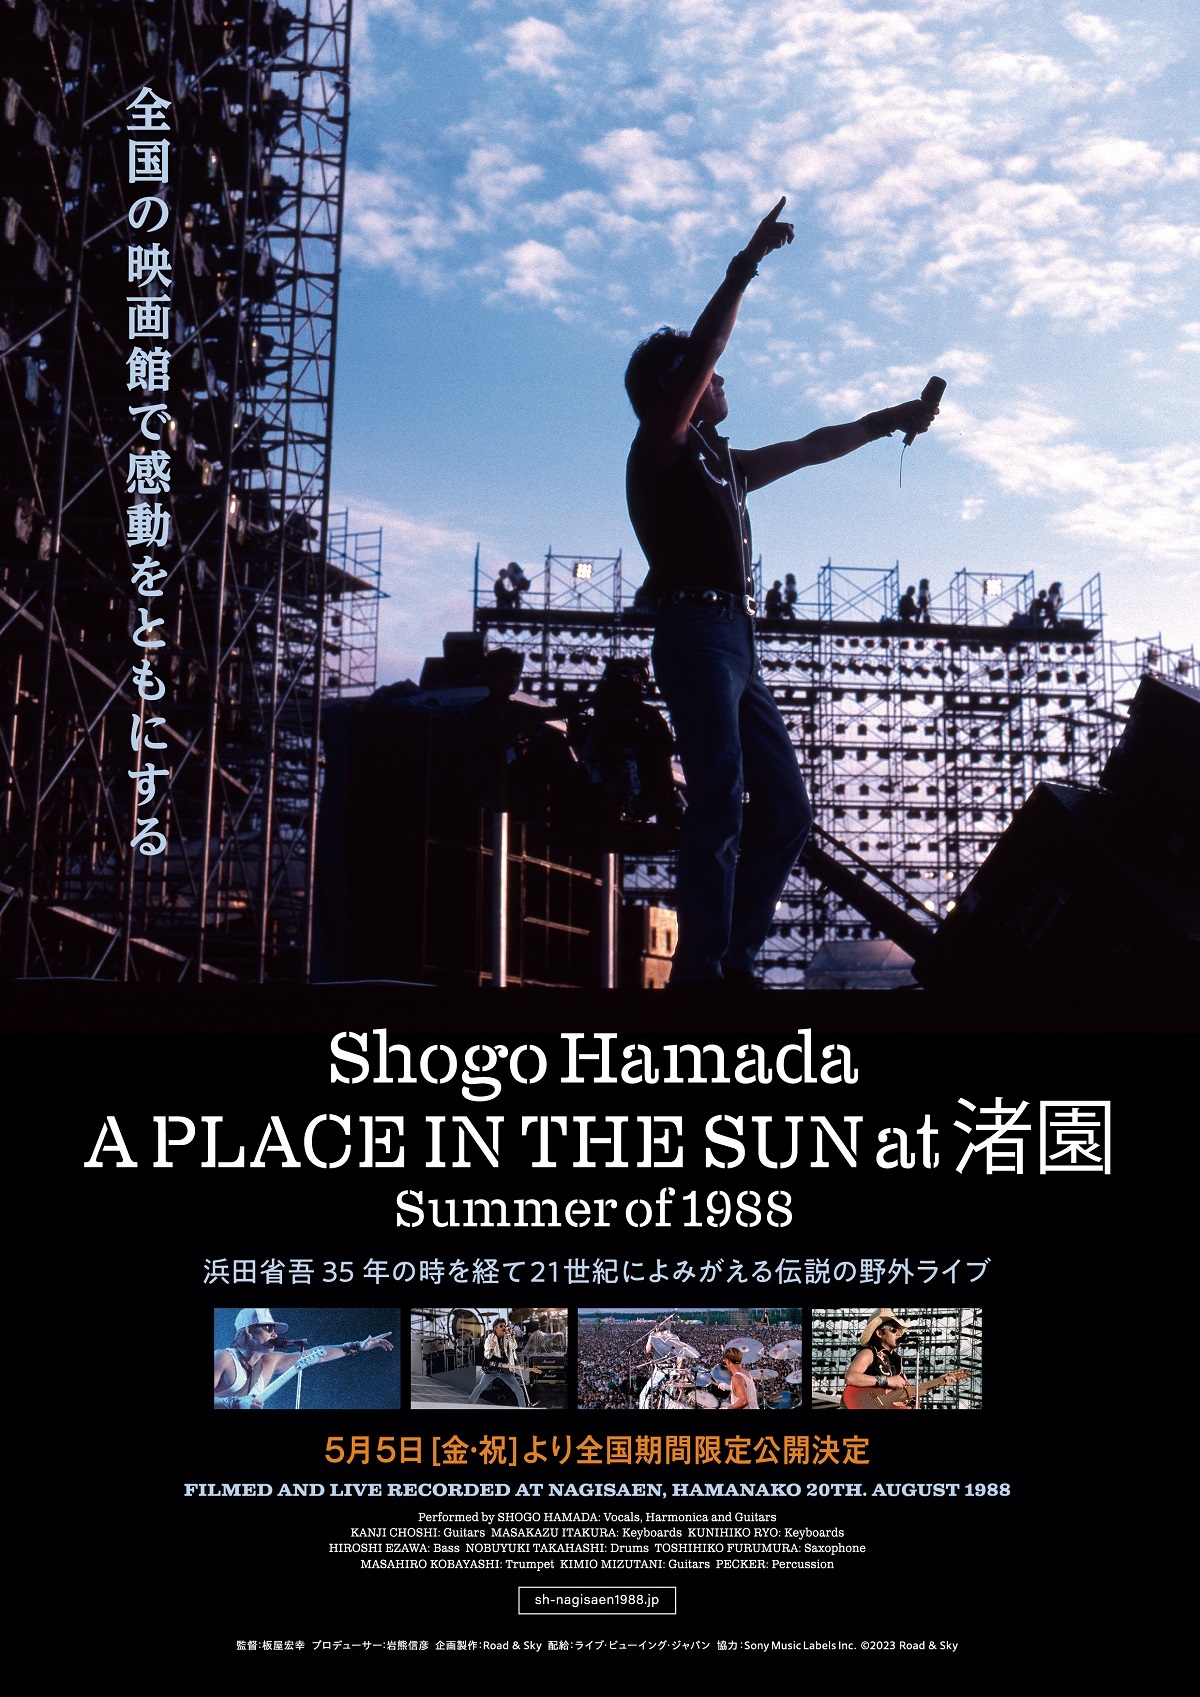 『A PLACE IN THE SUN at 渚園　Summer of 1988』ティザービジュアル